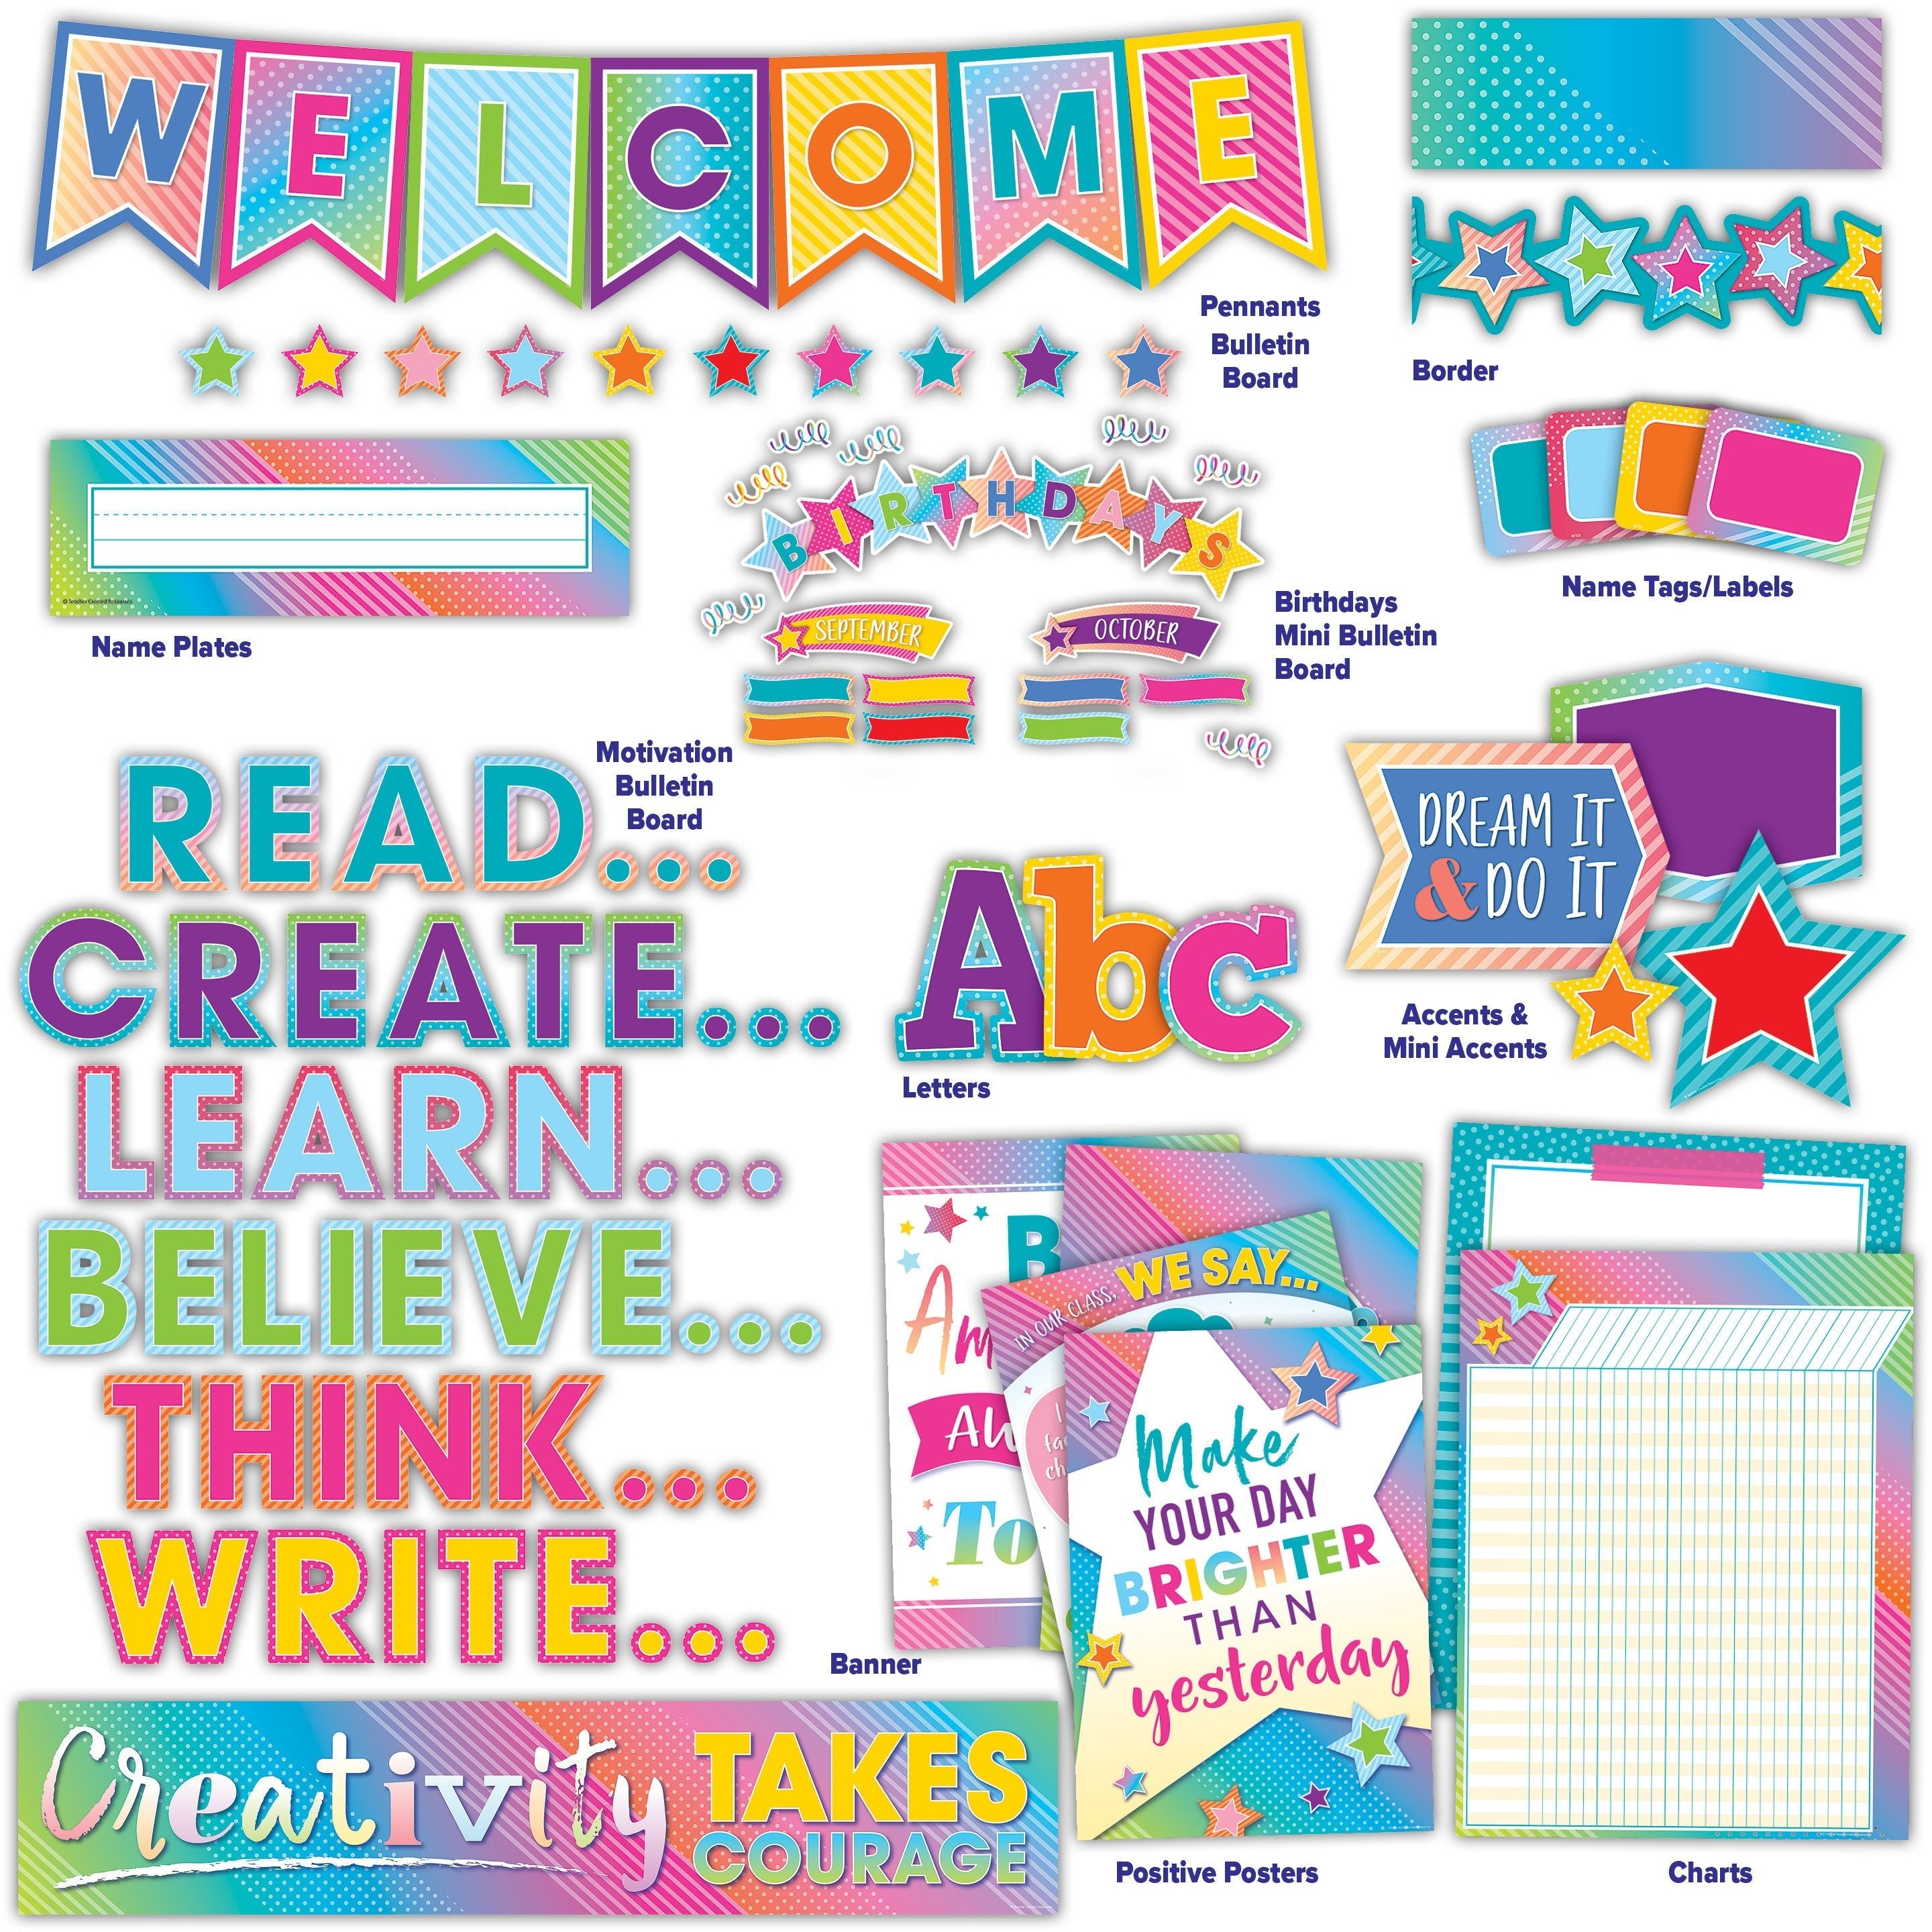 4in Kind Vibes Combo Pack Bulletin Board Letters